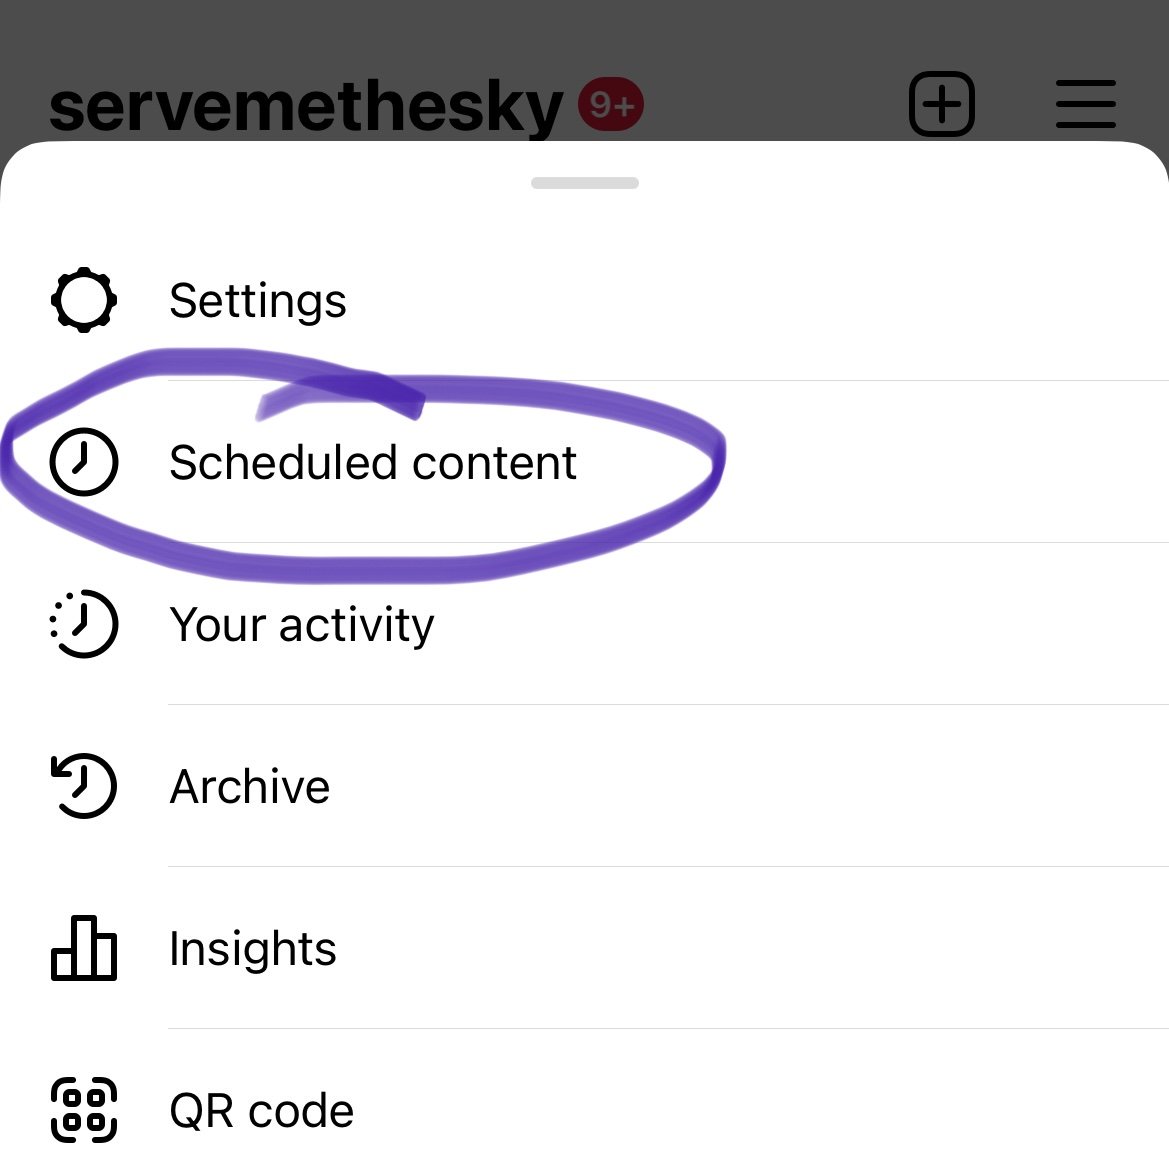 Select scheduled content